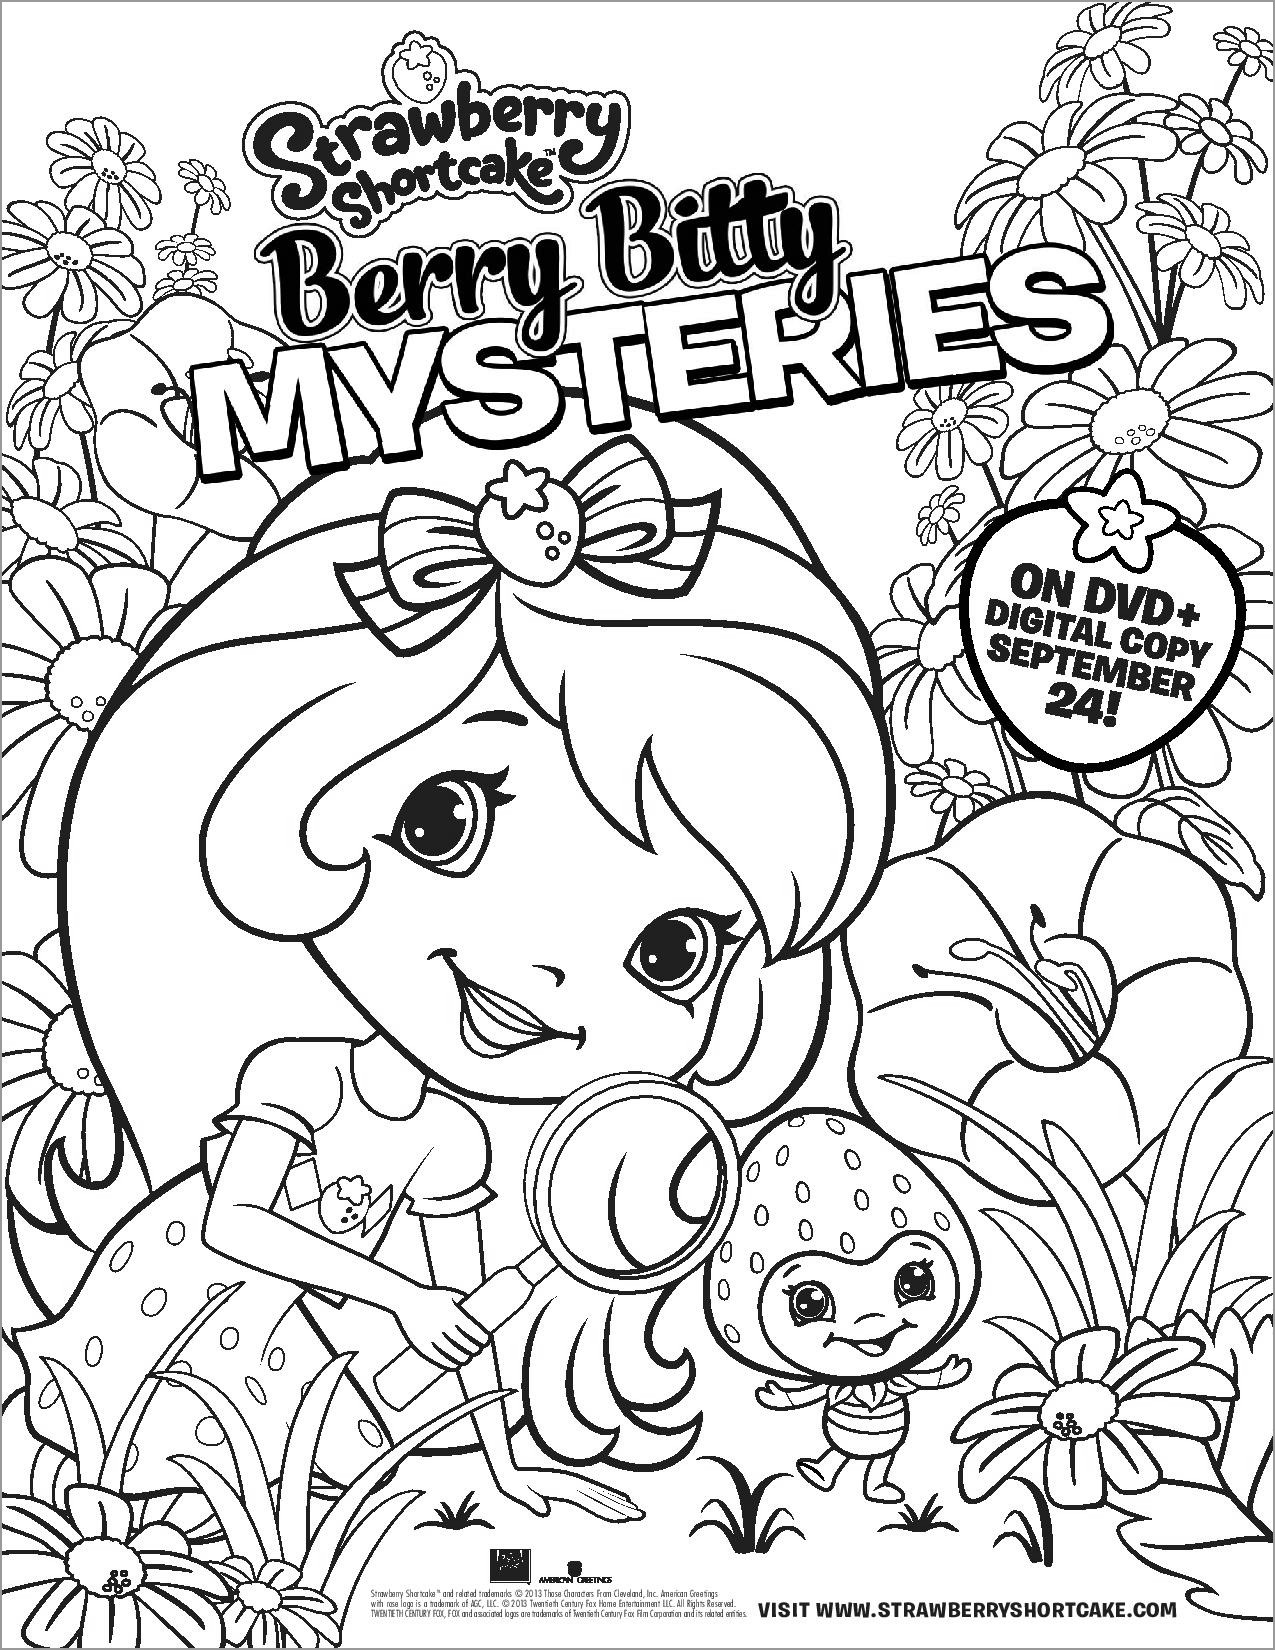 Strawberry Shortcake Coloring Pages for Adults